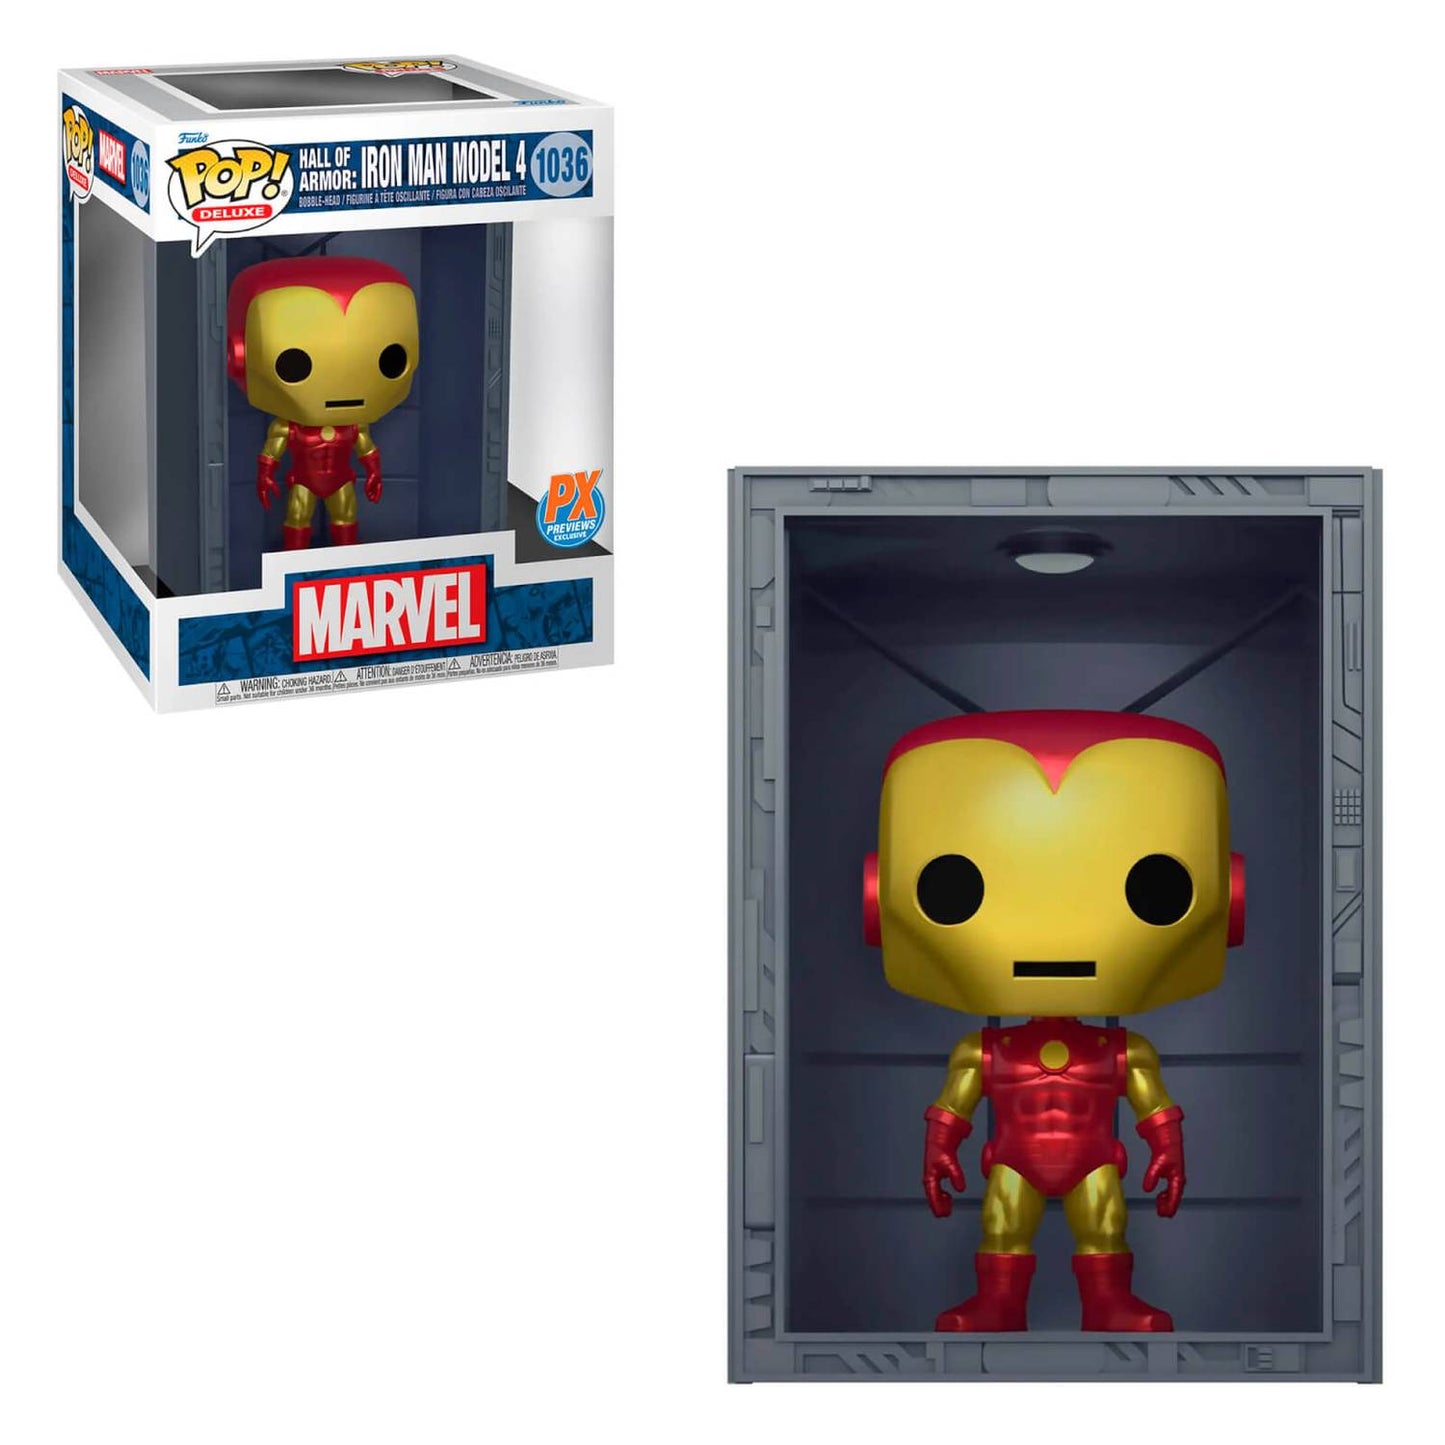 The Marvel Iron Man Hall of Armor Funko Pop PX Exclusive Series Is Now  Complete